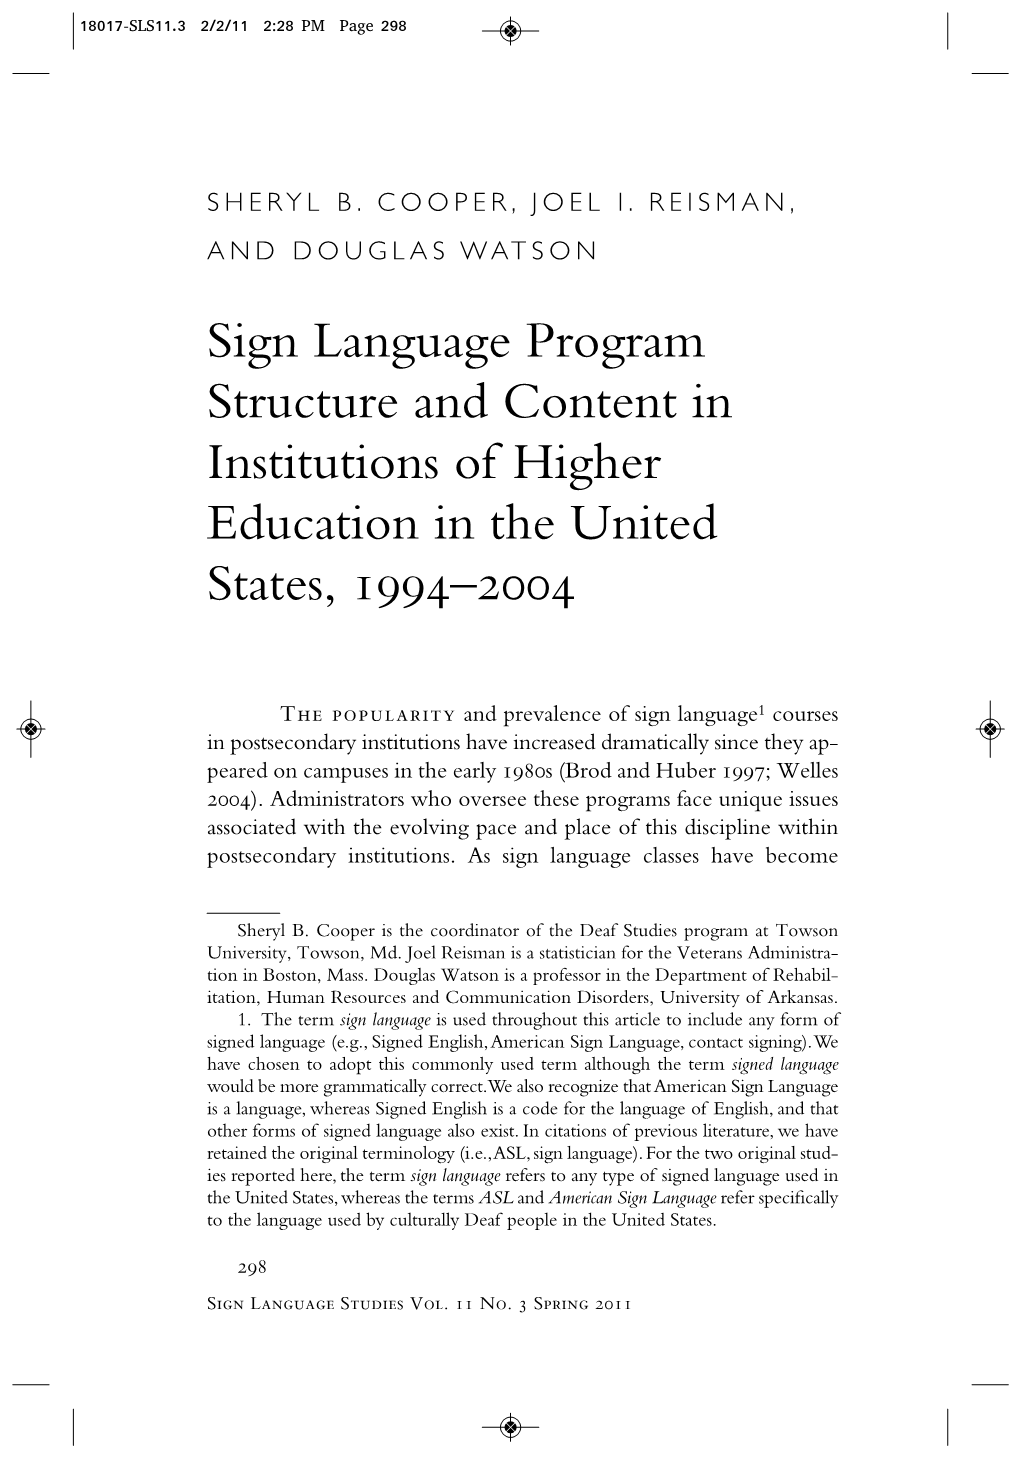 Sign Language Program Structure and Content in Institutions of Higher Education in the United States, 1994–2004